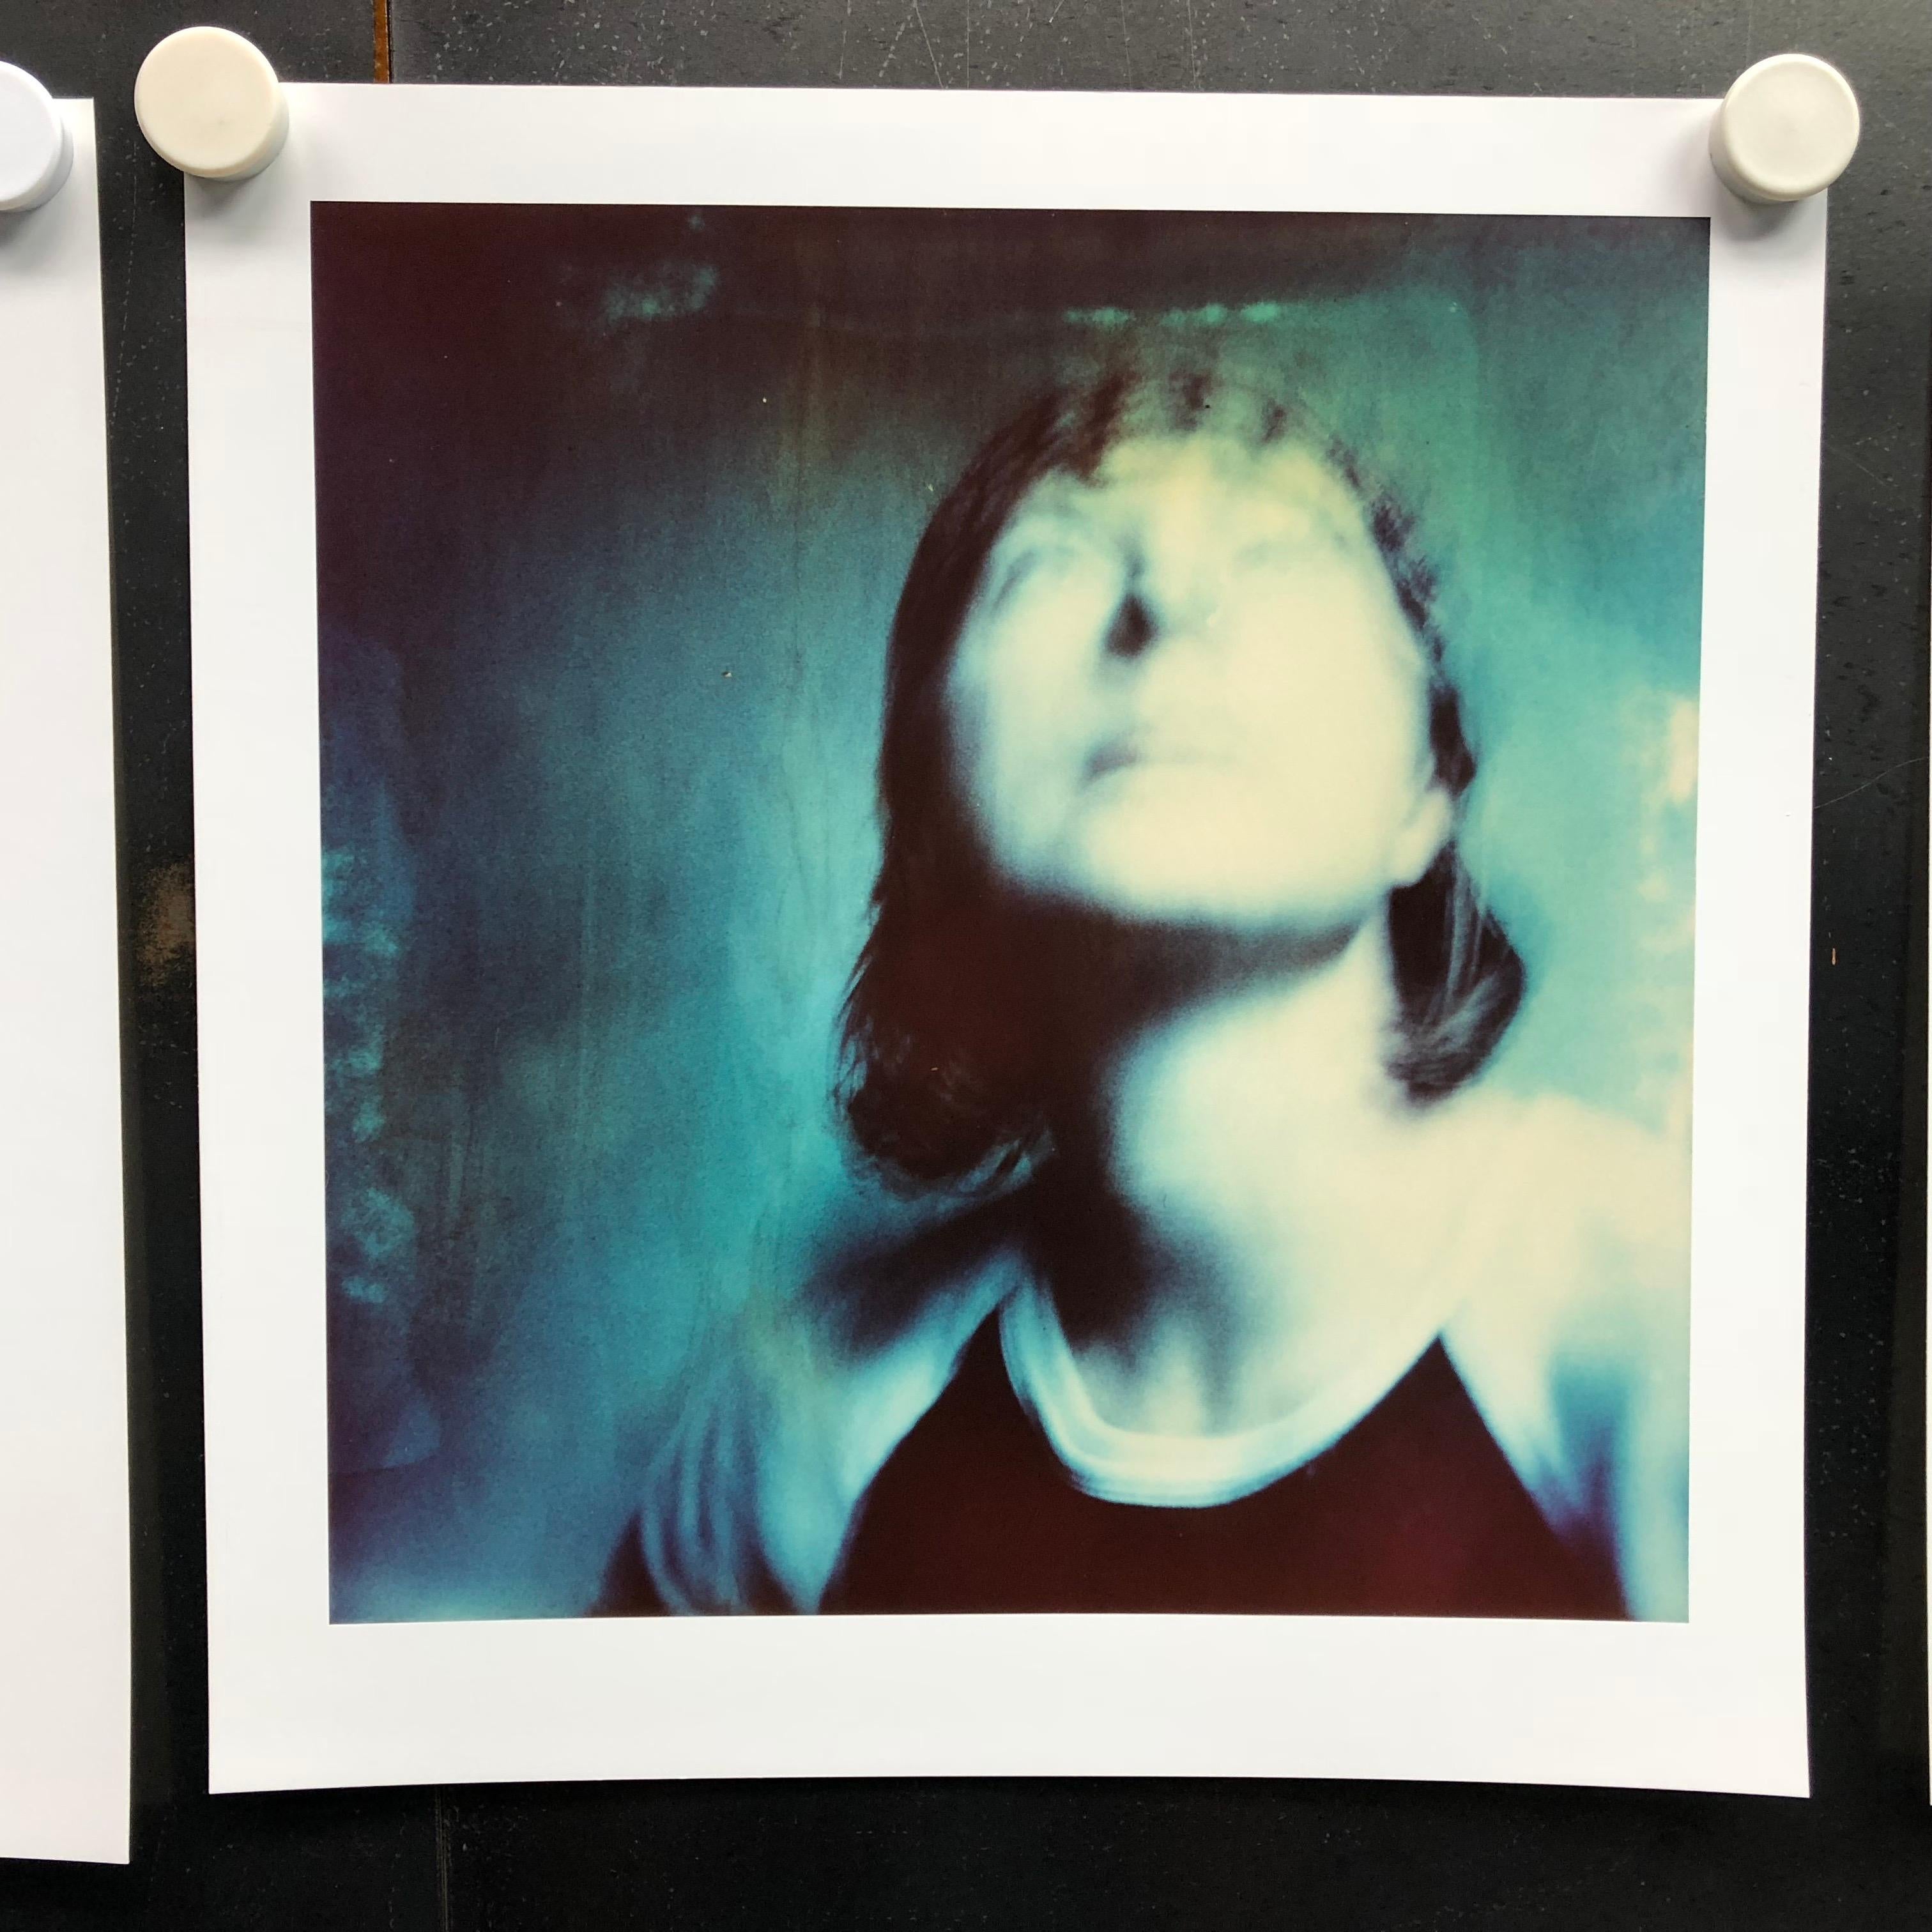 'Max Blue', triptych (The Last Picture Show), 2005, Edition 1/5, each 38x36cm, 38x122cm installed,  
3 analog C-Prints, hand-printed by the artist on Fuji Crystal Achive Paper, matte finish, 
based on 3 Polaroids. 
Certificate and signature